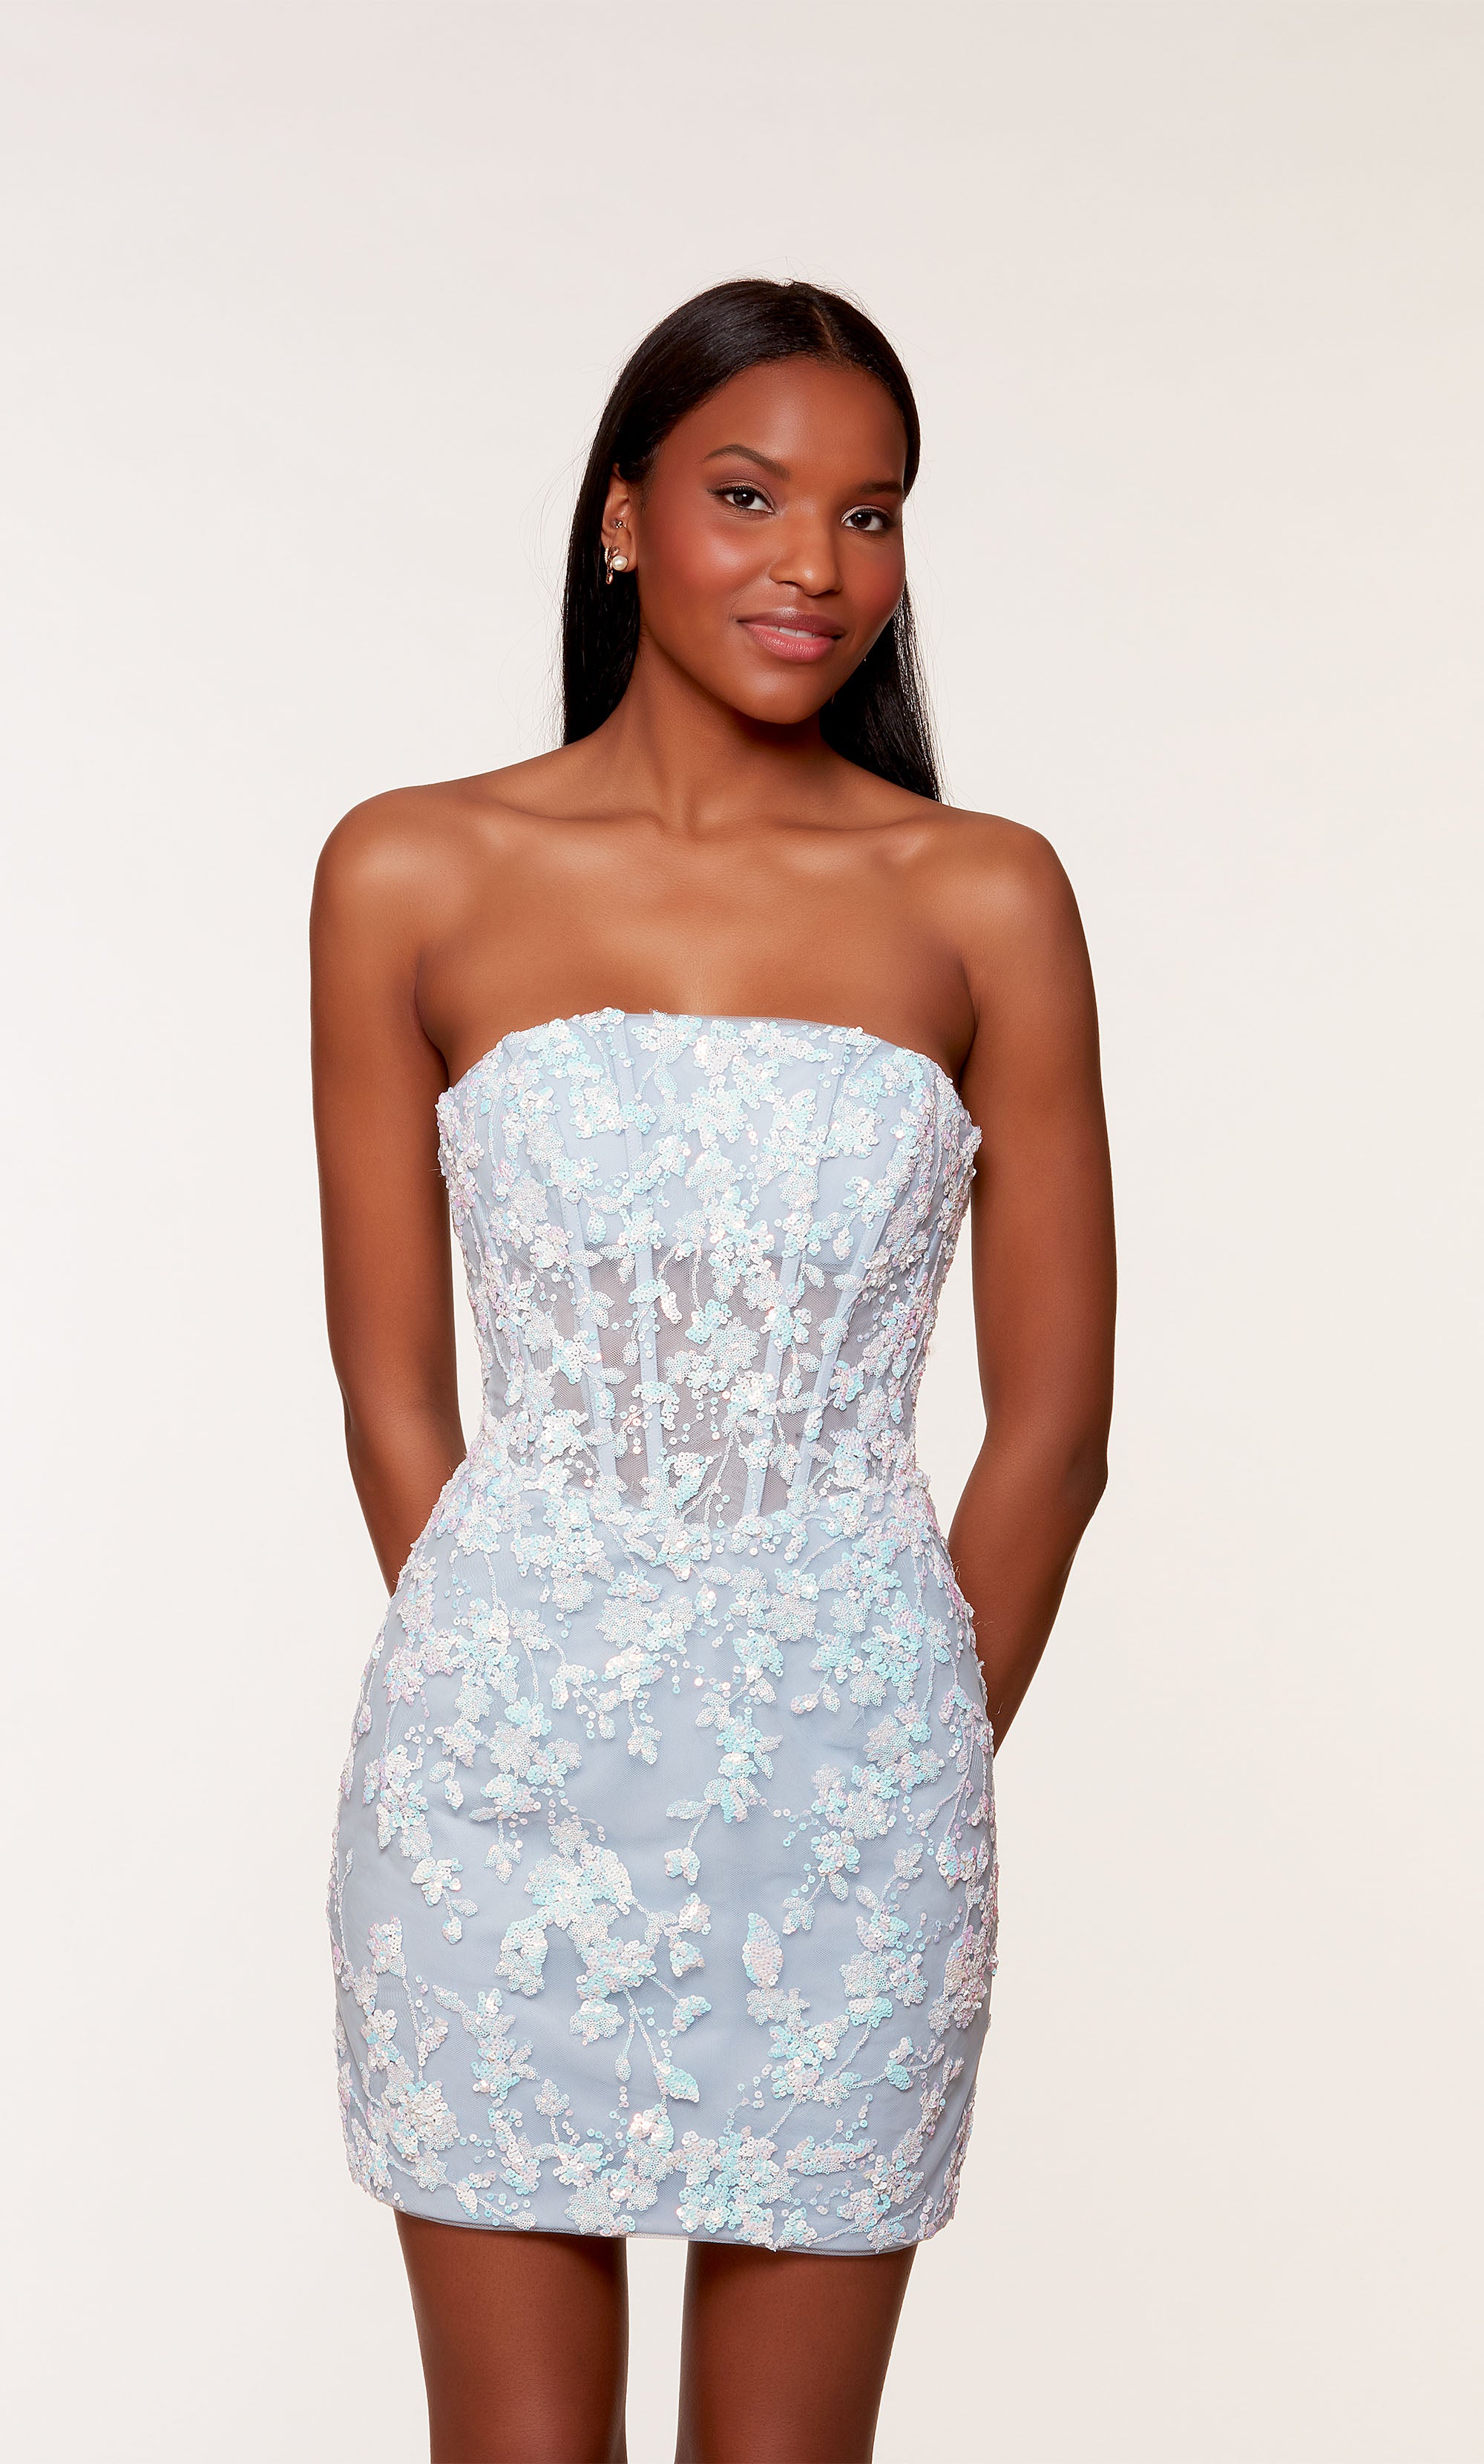 Formal Dress: 4650. Short, Strapless, Straight, Lace-up Back